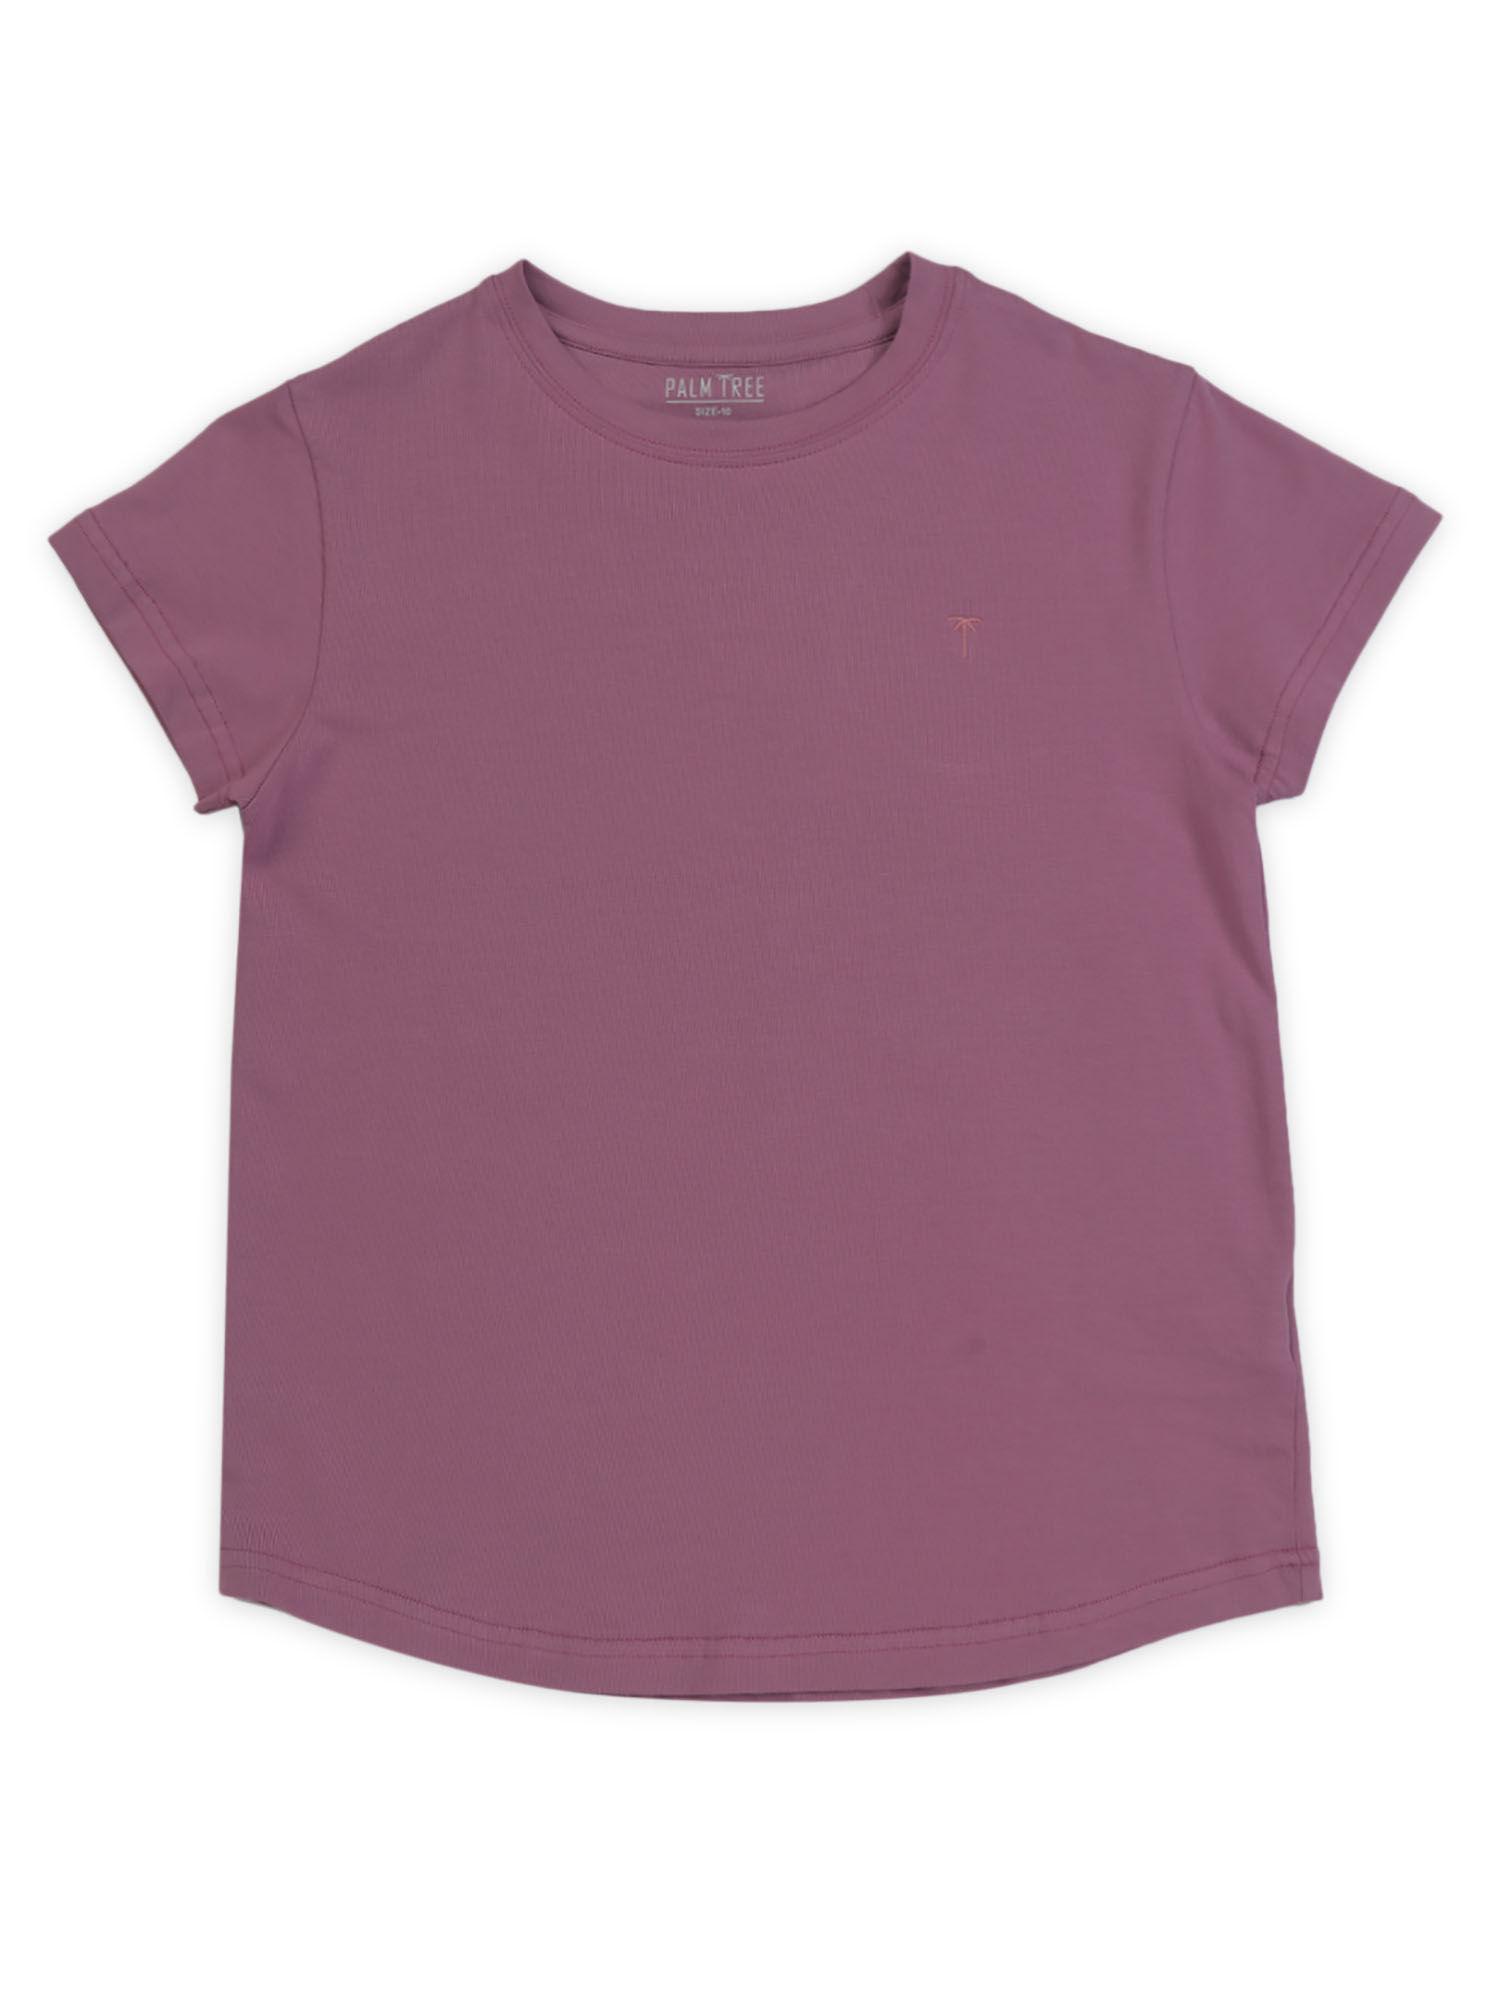 girls purple cotton solid knits top half sleeves